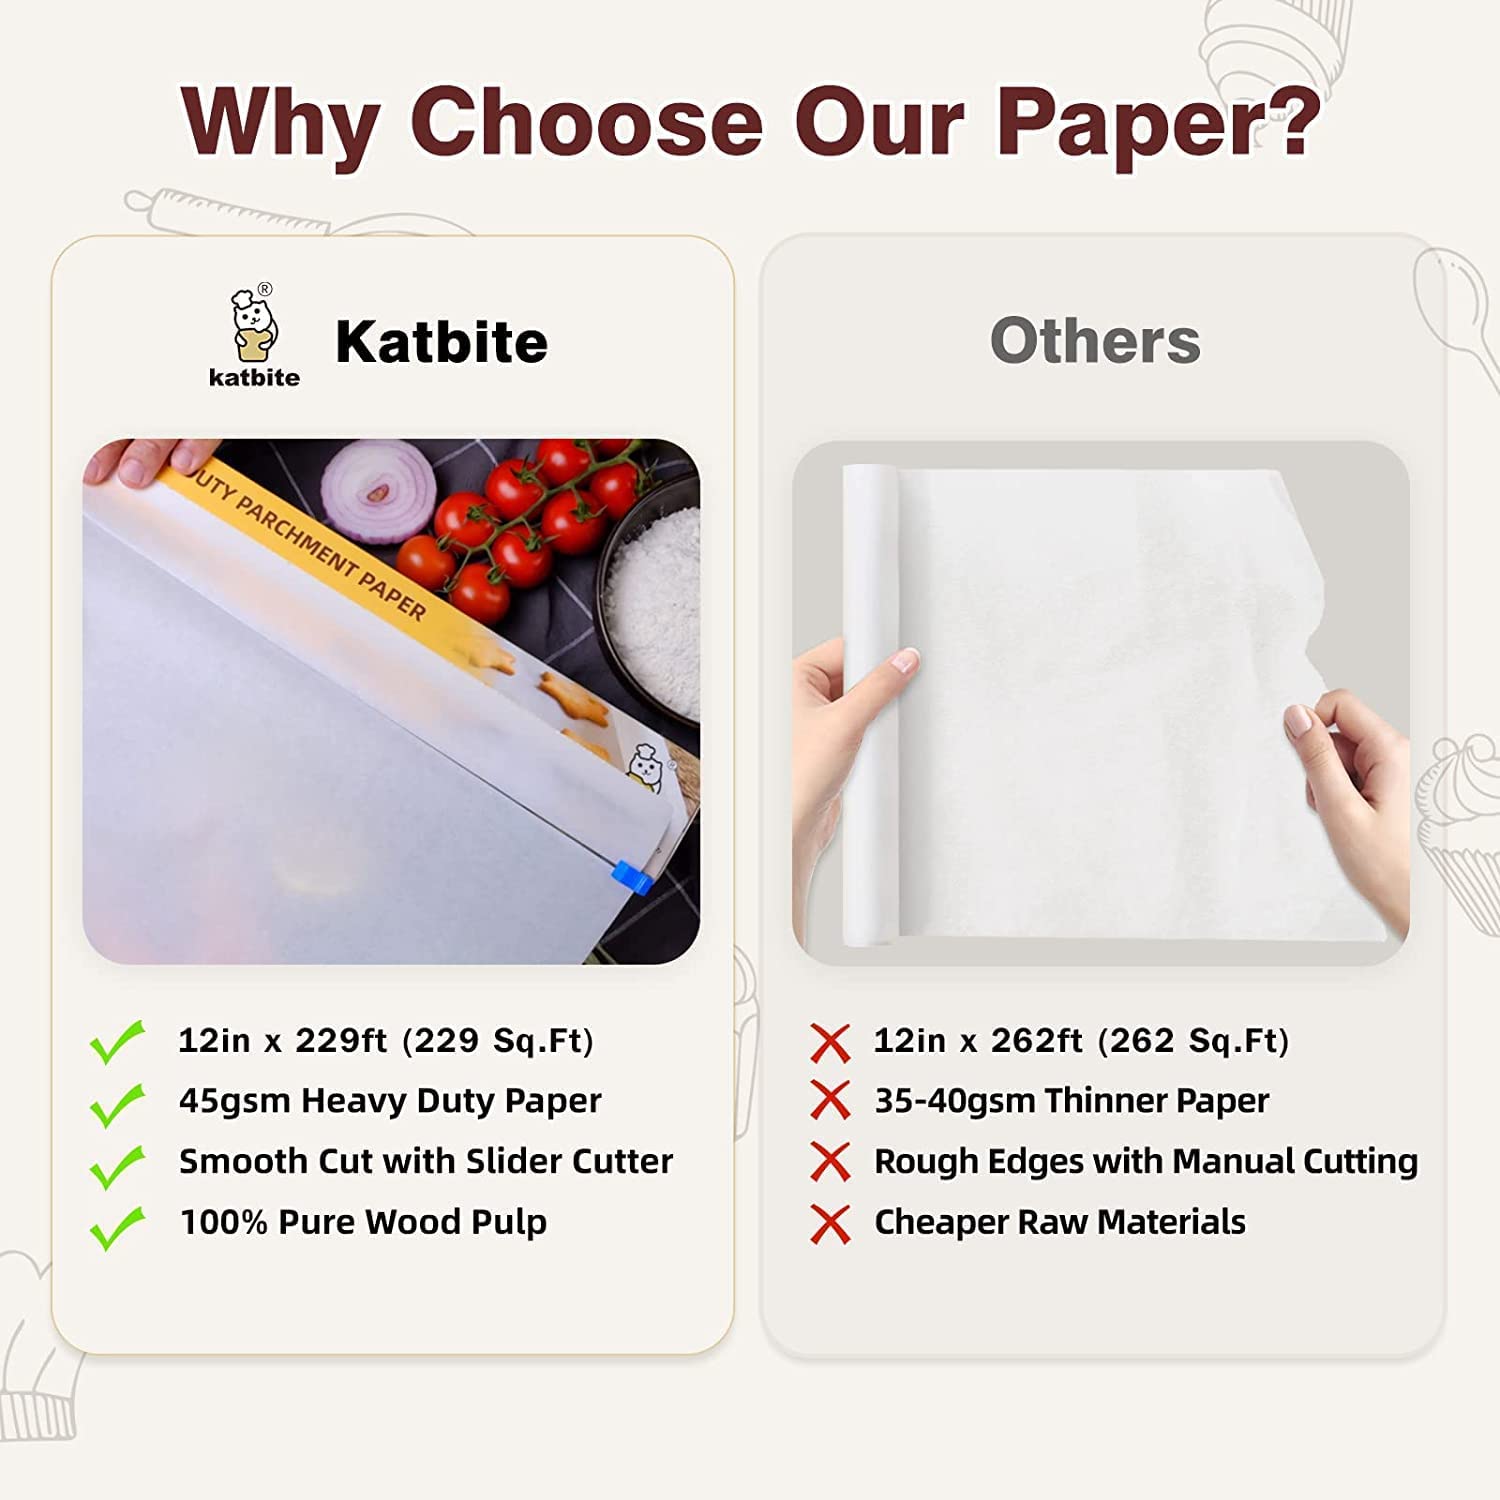 Parchment Paper for Baking, Baking Paper, Non-Stick Parchment Paper Roll  for Baking, Cooking, Grilling, Air Fryer and Steaming